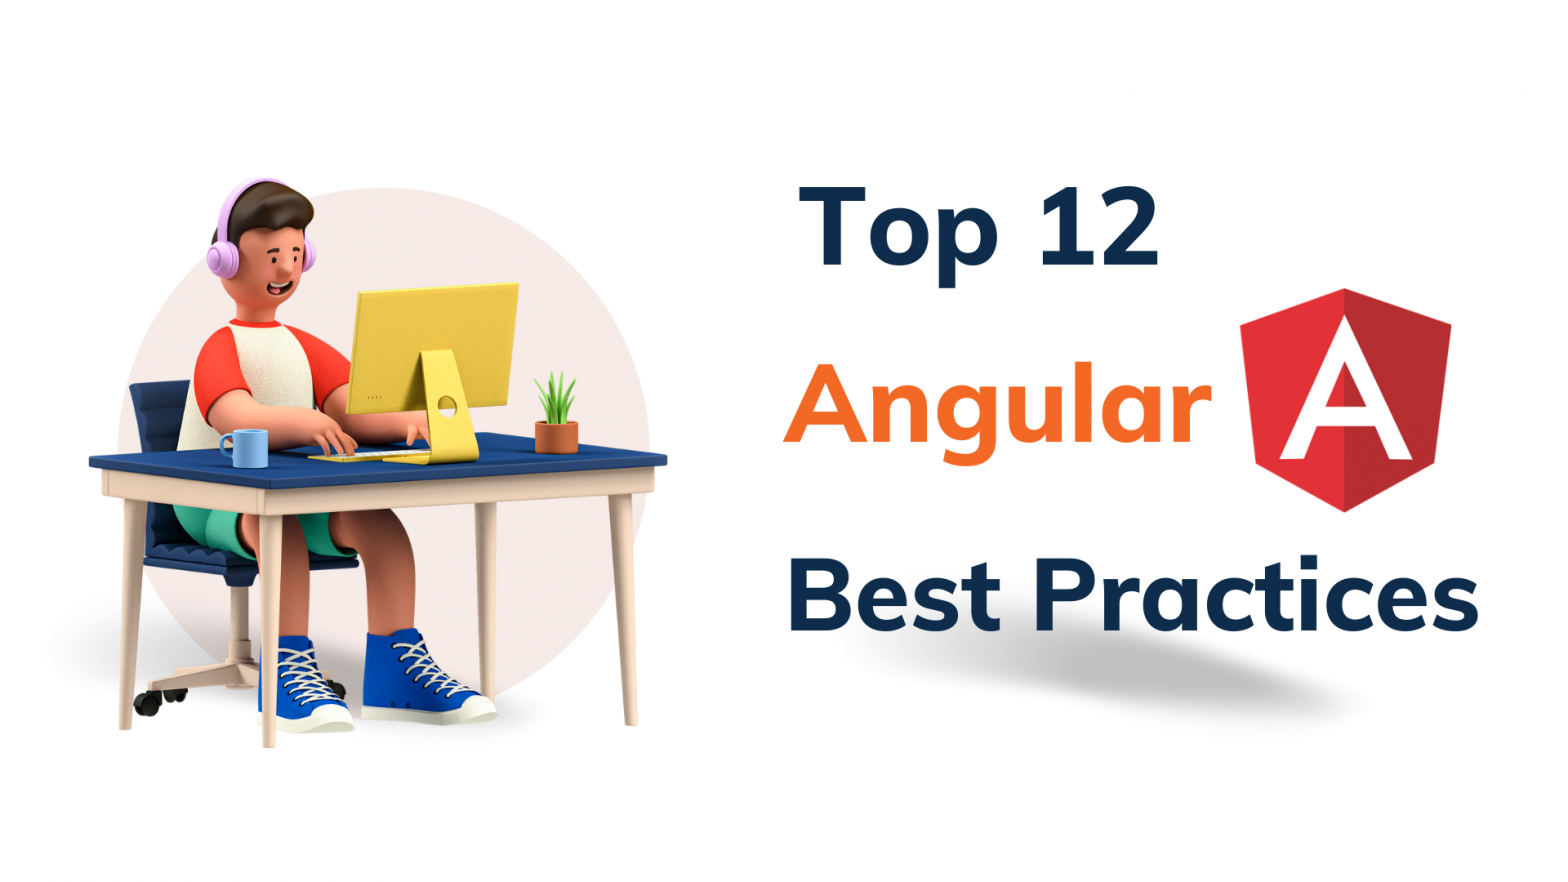 Angular Development Best Practices to follow in 2022